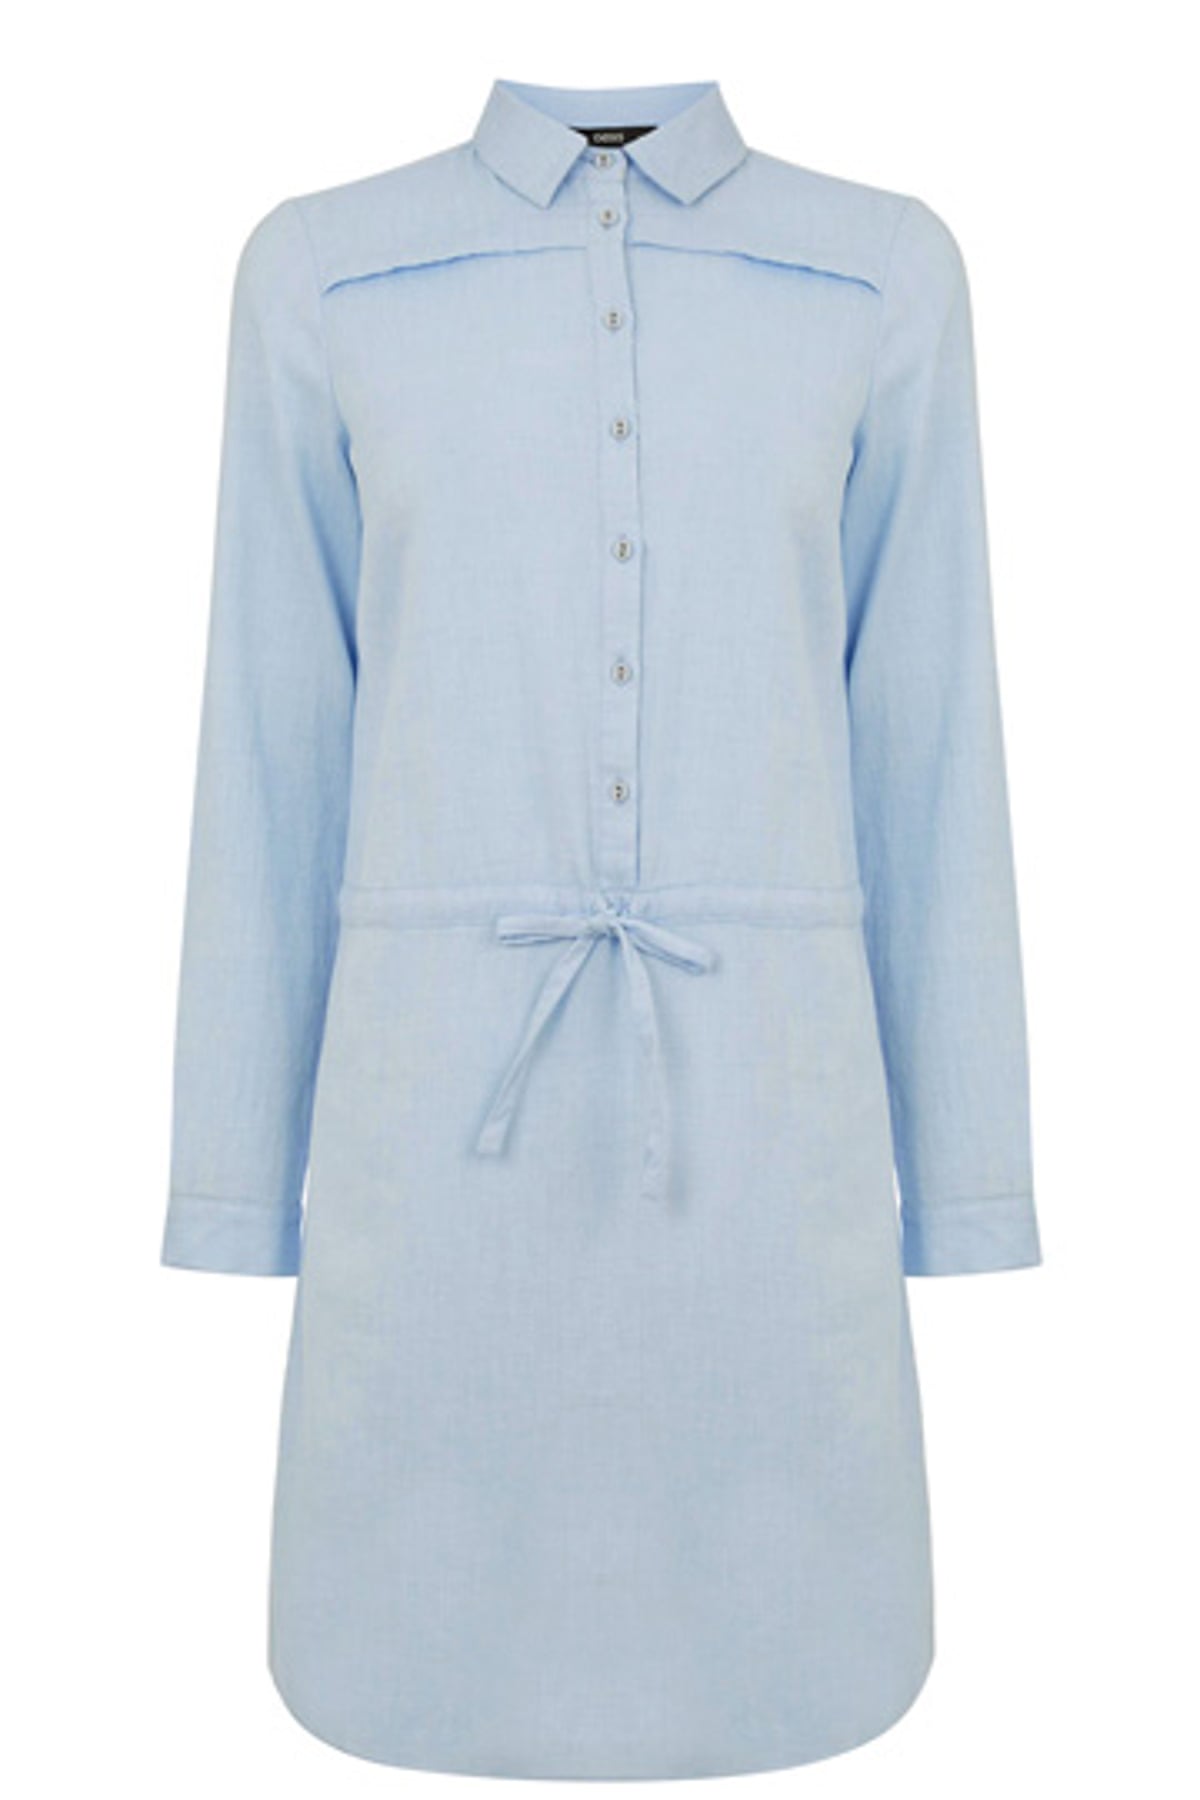 Sale on: 10 of the best pieces already on sale | Fashion | The Guardian